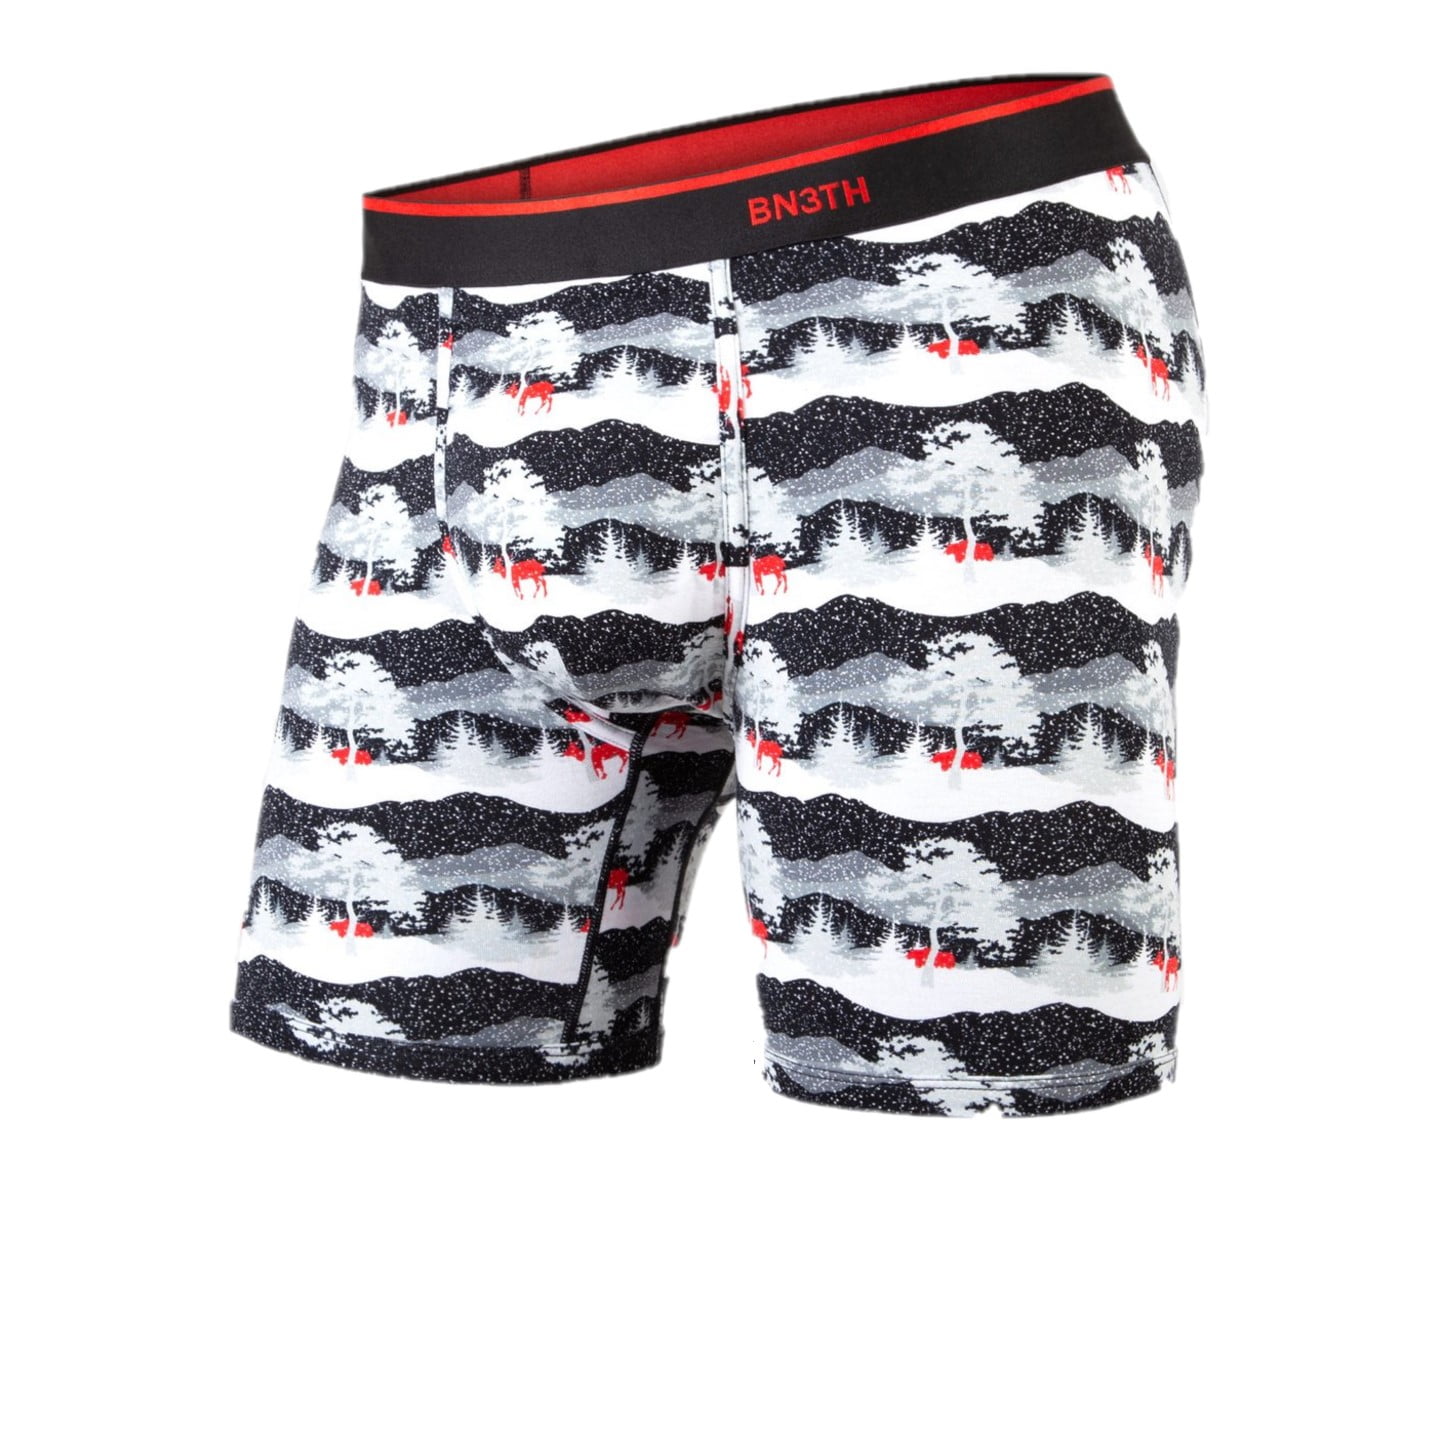 BN3TH Men's Prints Classic Boxer Brief (Dashed-Multi, Large) 